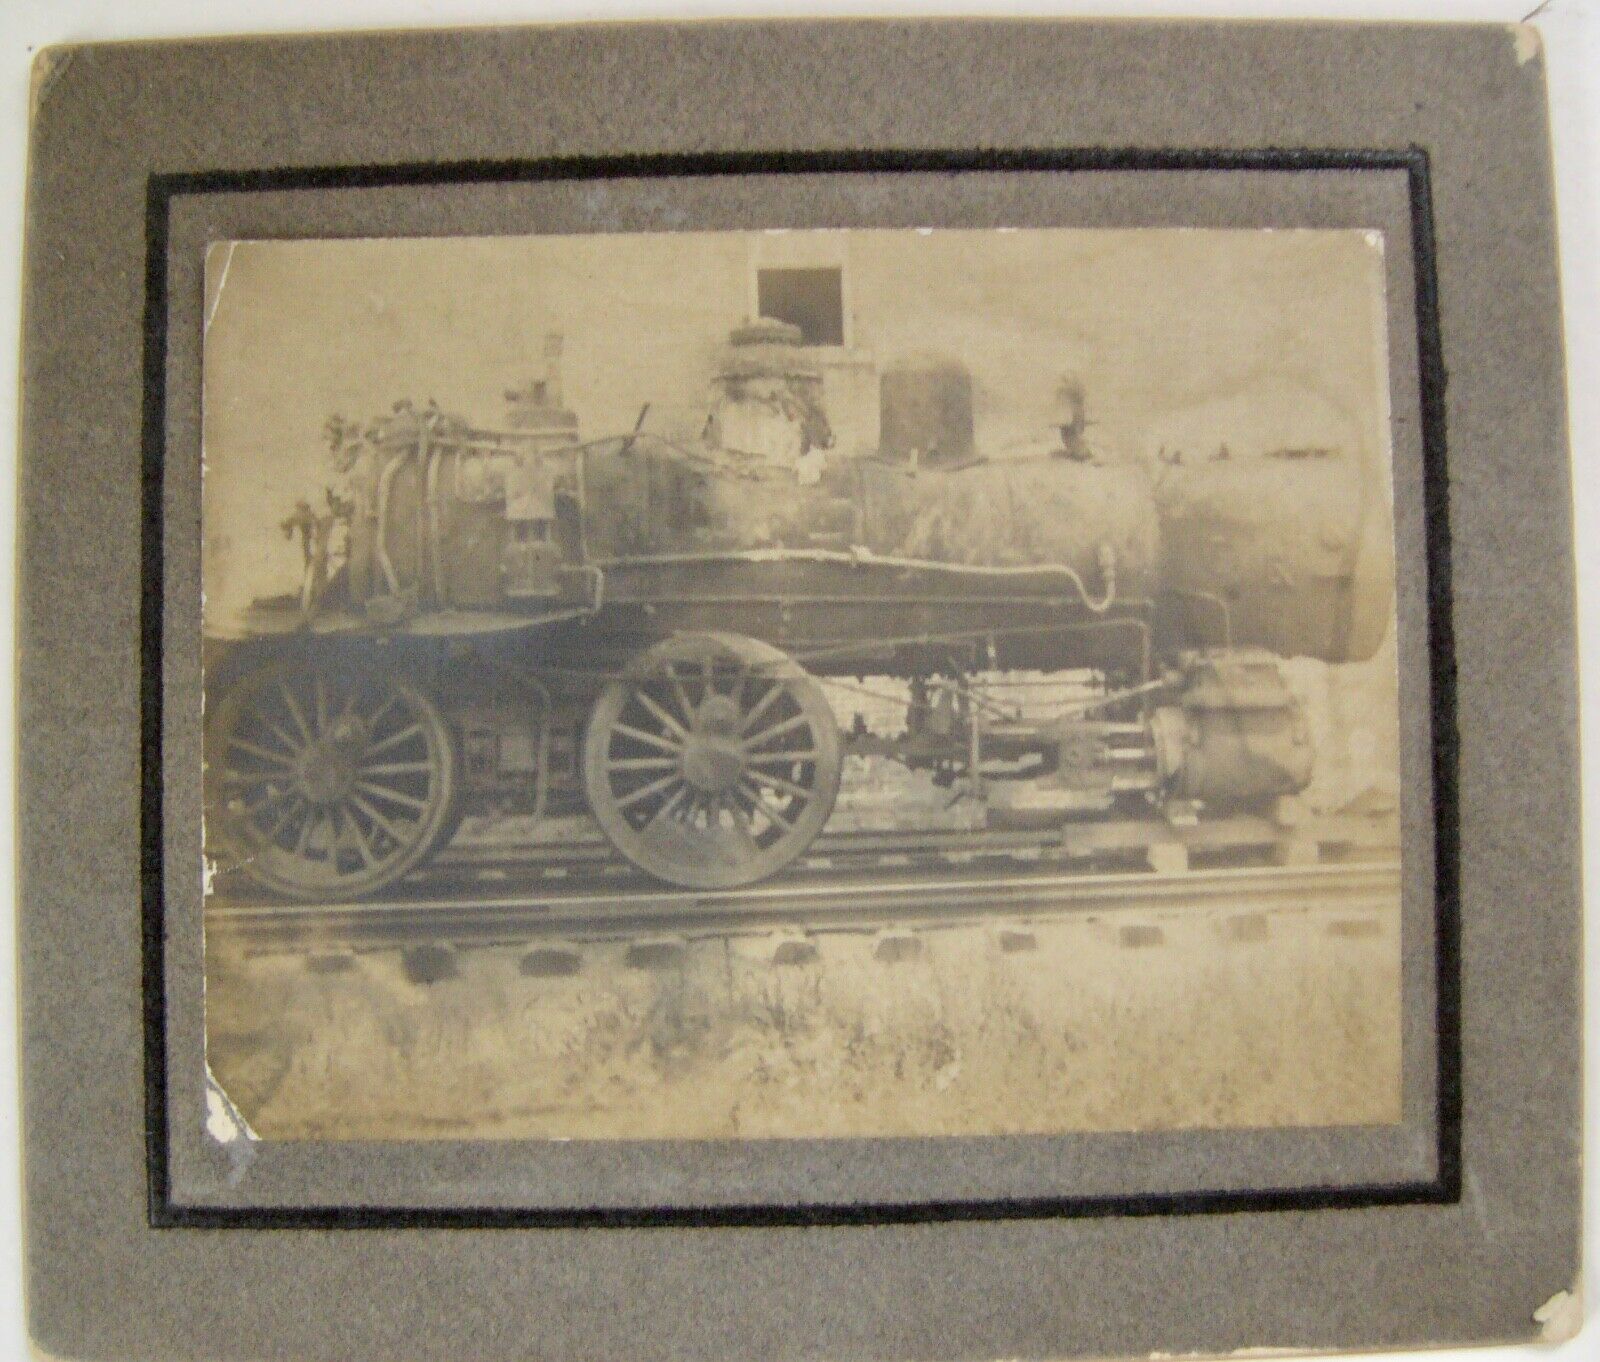 Photograph EARLY Steam Engine on Railroad Track, Mounted on Cardboard